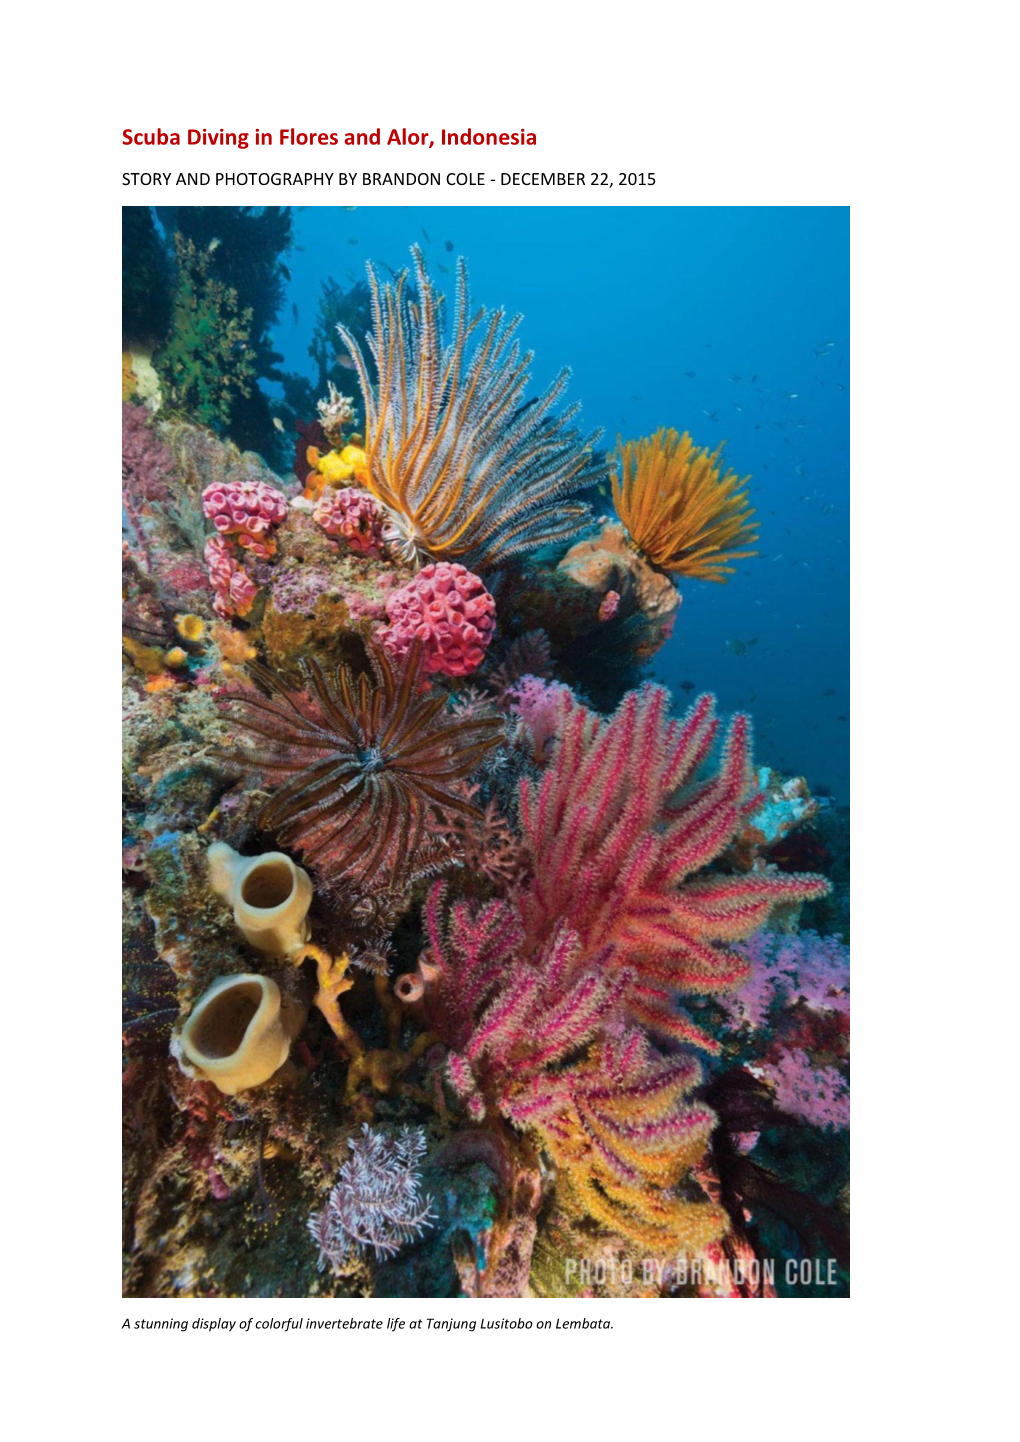 Scuba Diving in Flores and Alor, Indonesia